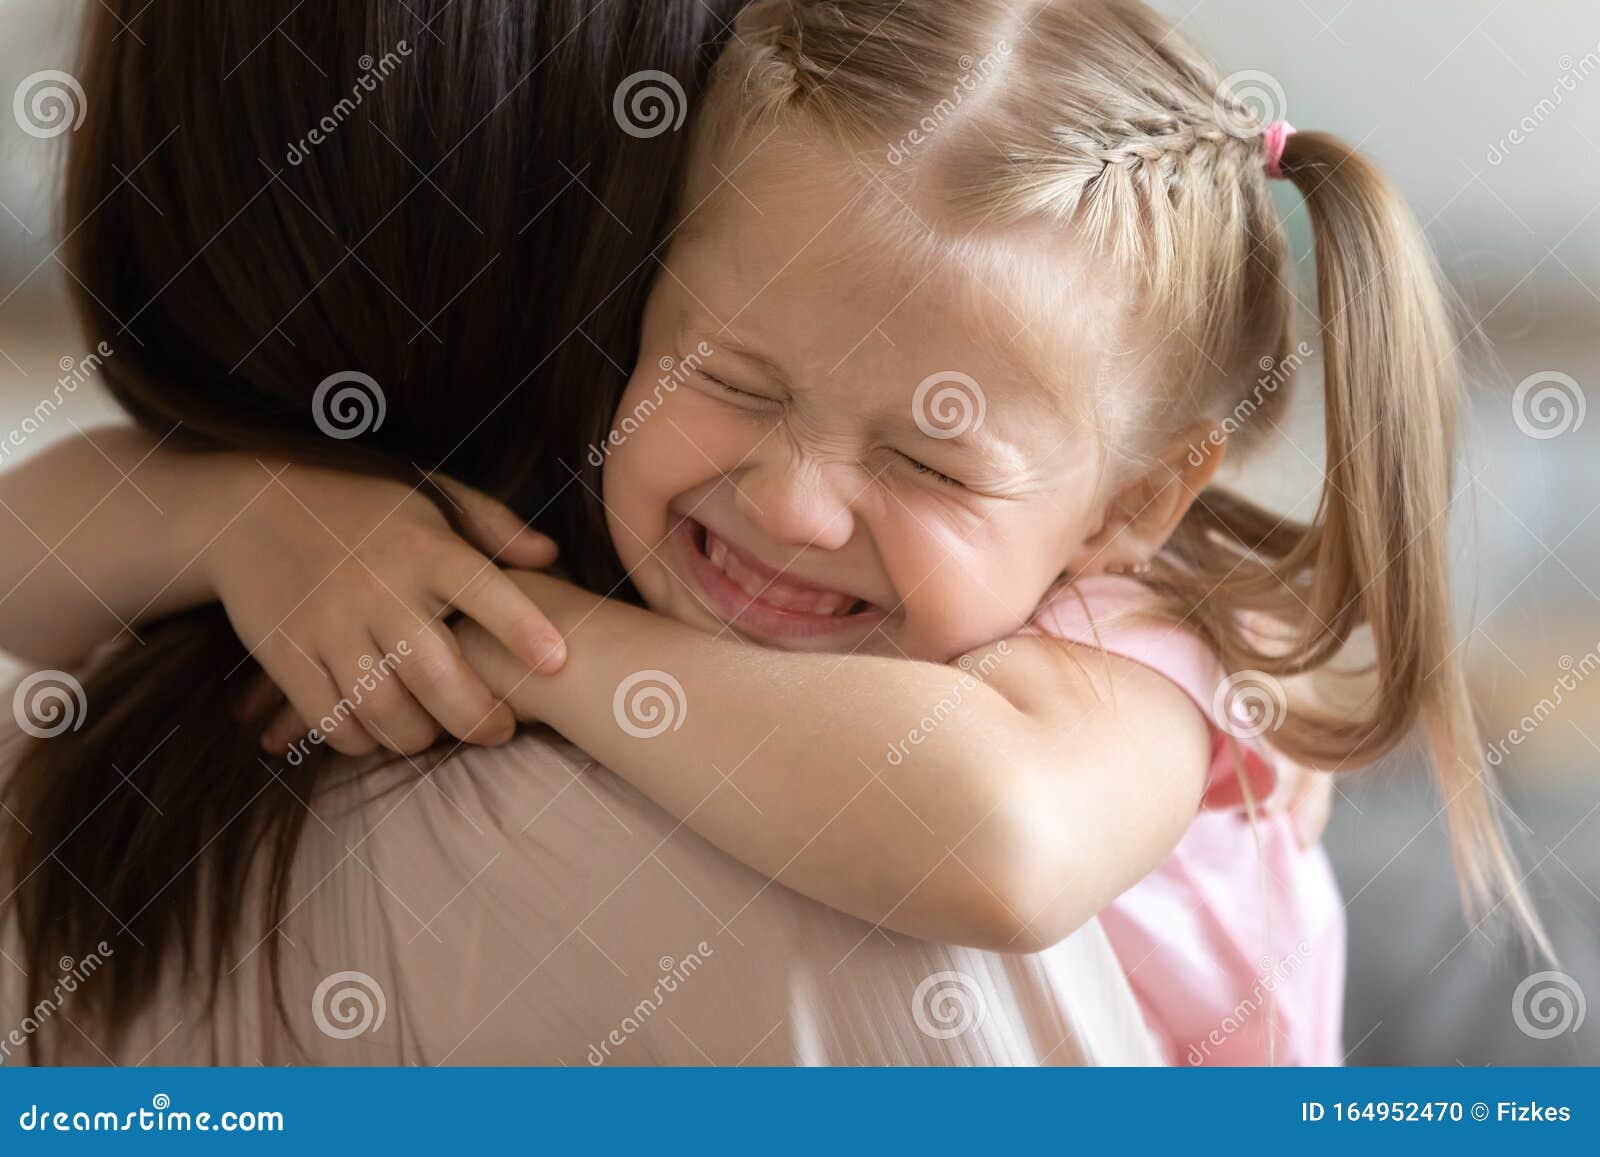 funny cute little girl smiling embracing foster care parent mum